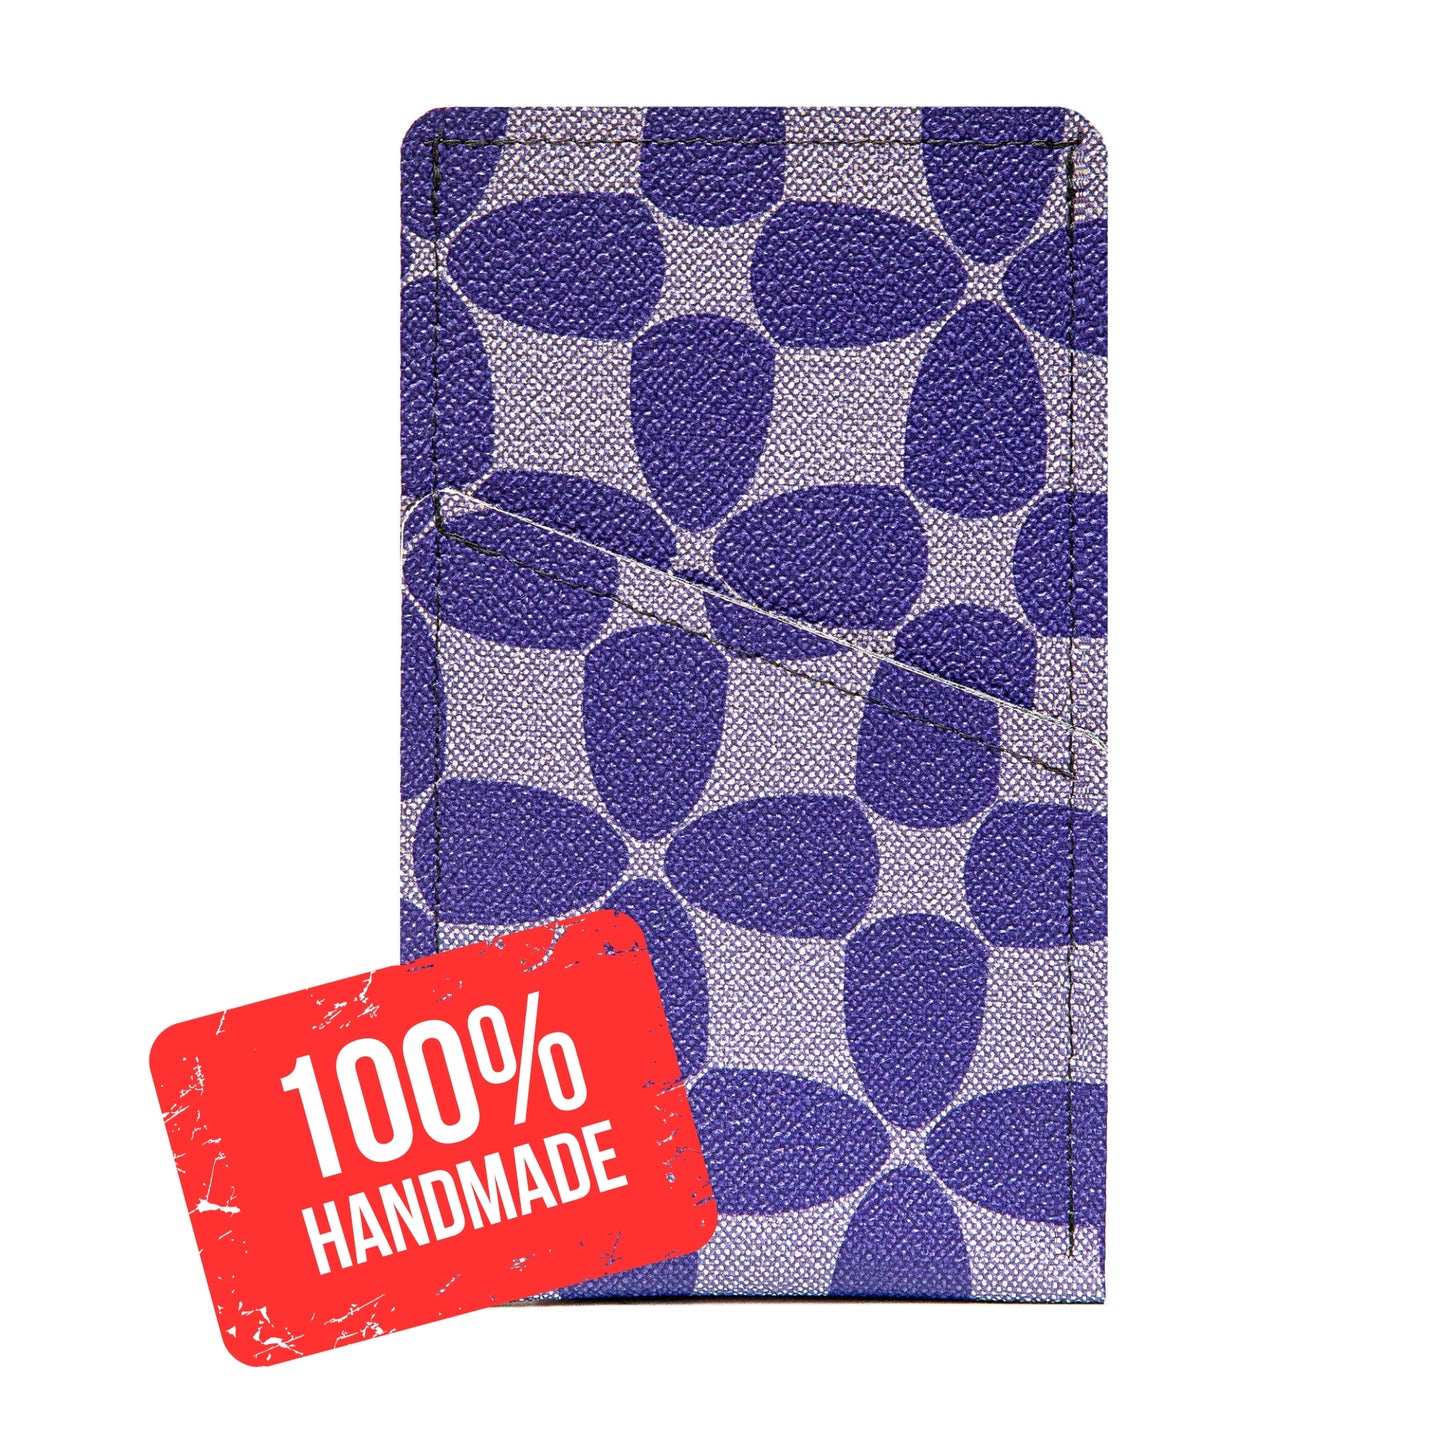 Modern Faux Leather iPhone Sleeve with Purple Abstract Pattern Design and Card Pocket